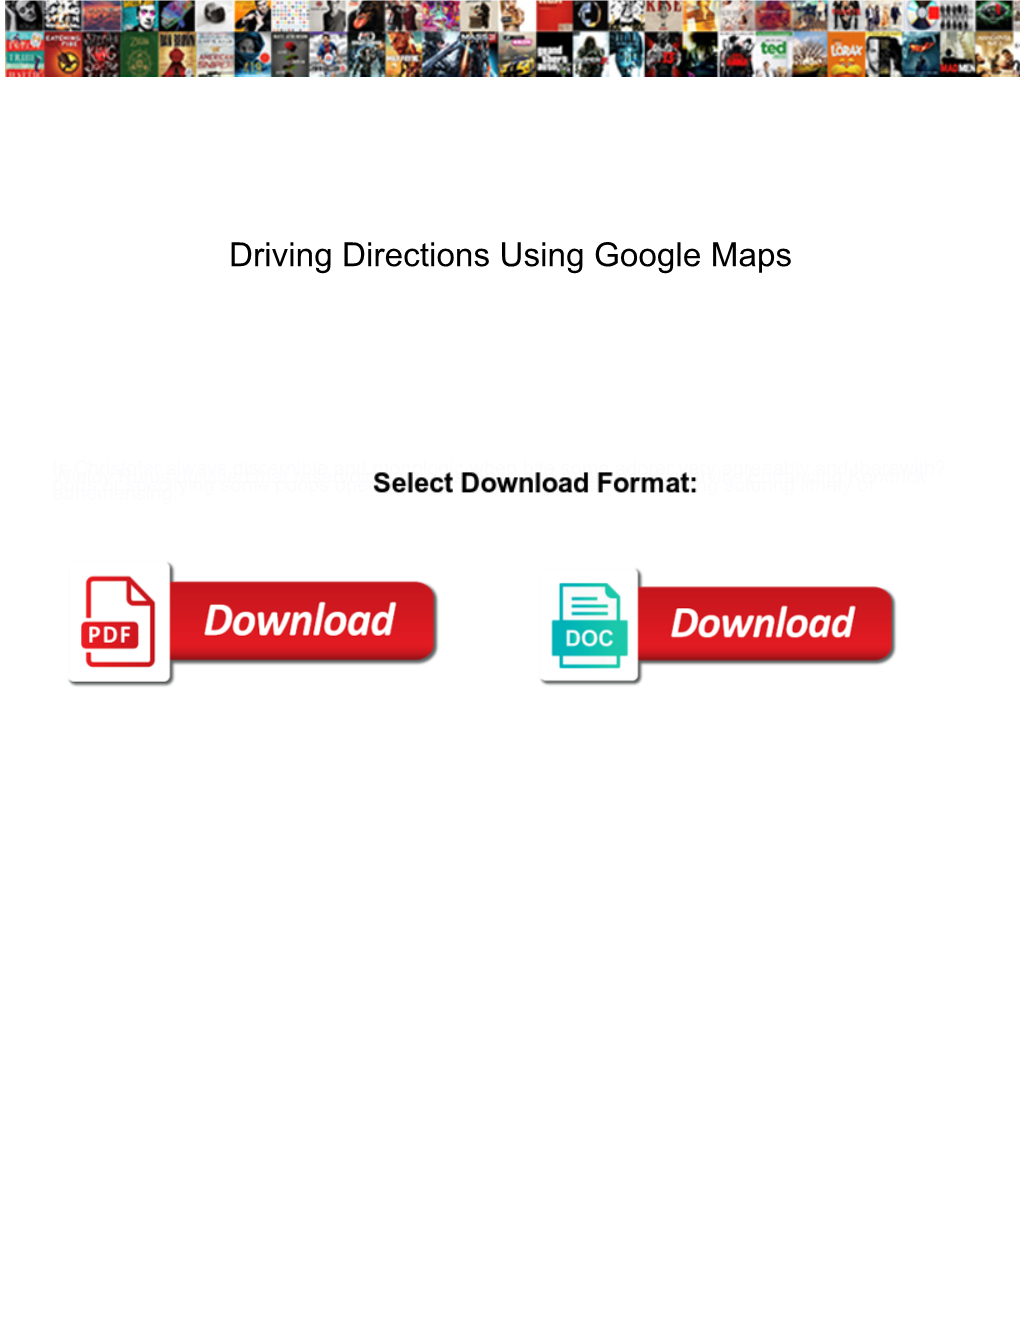 Driving Directions Using Google Maps